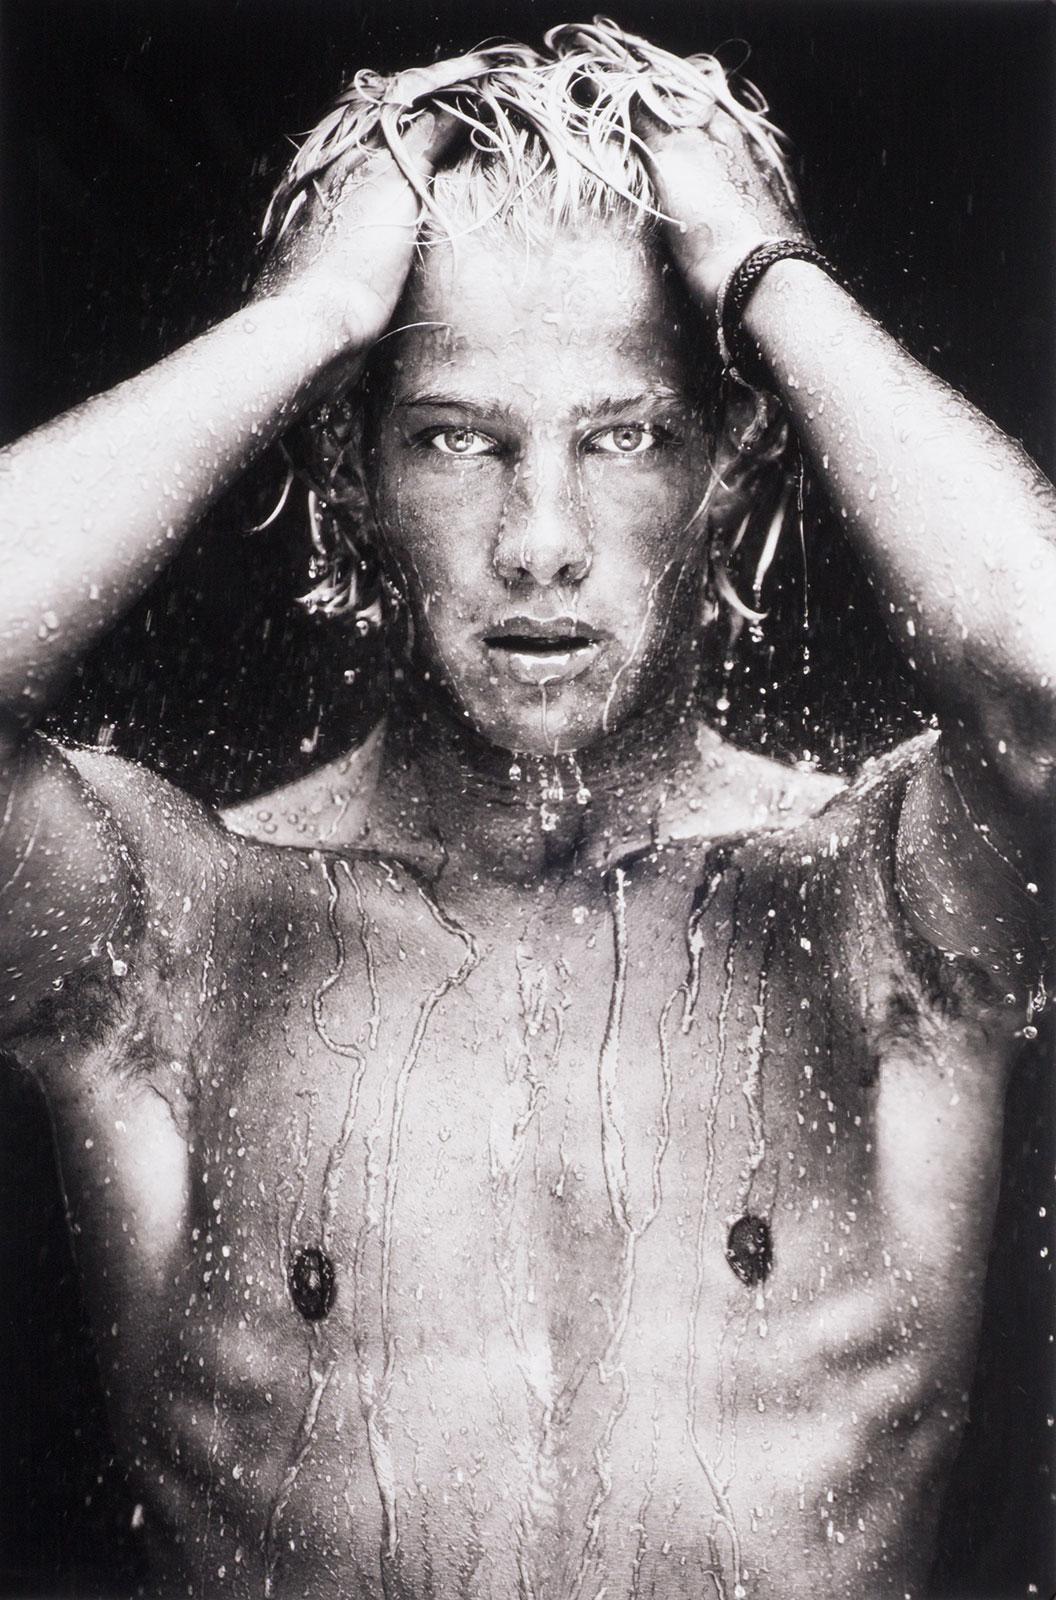 Benno Thoma Black and White Photograph - WET, Portrait (young nude Dutch boy is dripping wet and looking directly out)